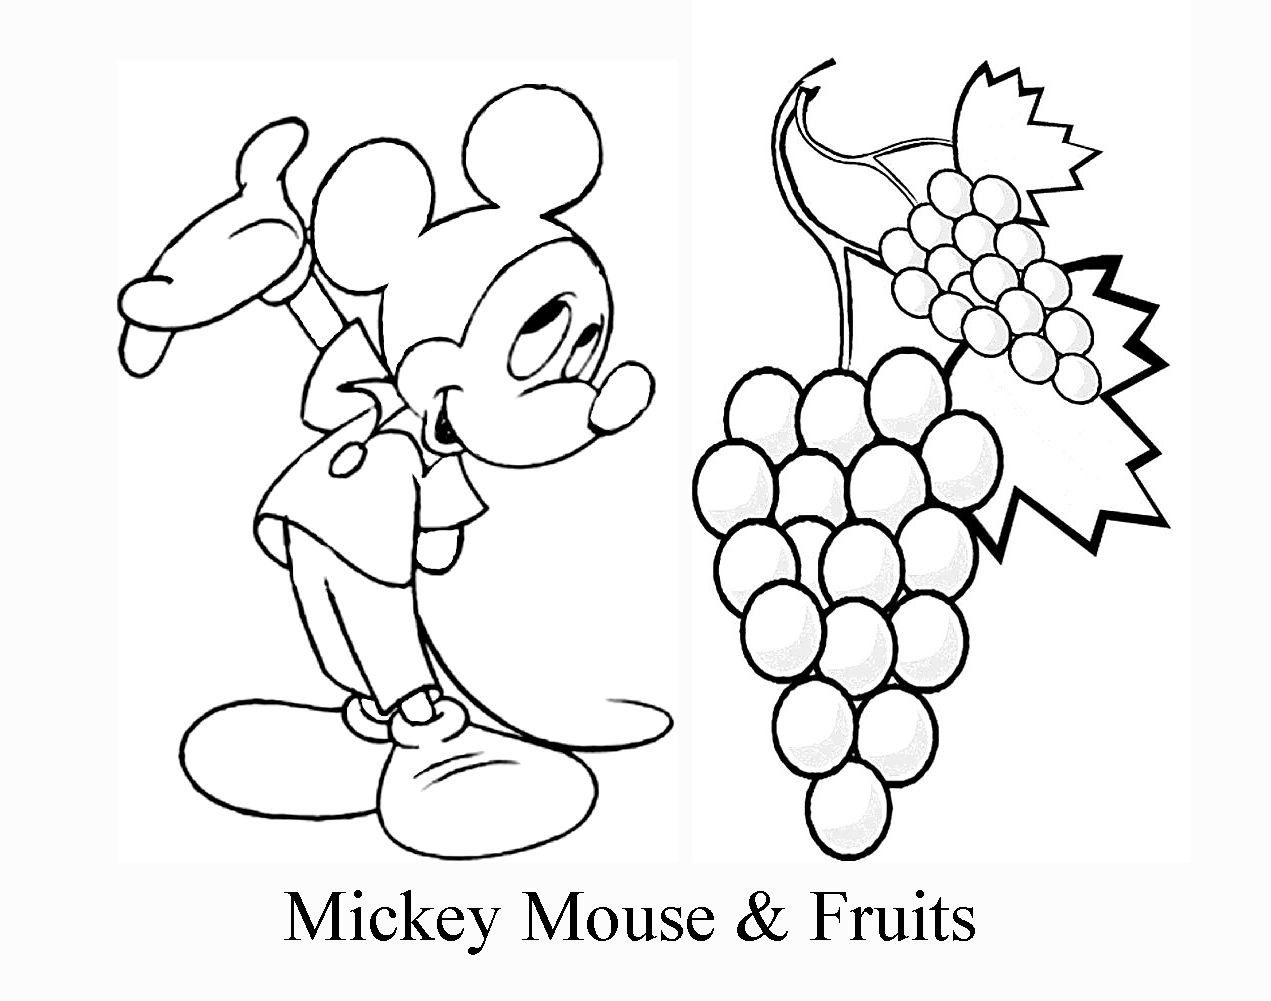 Disney Mickey Mouse   Fruits Coloring Pages   Learn To Coloring